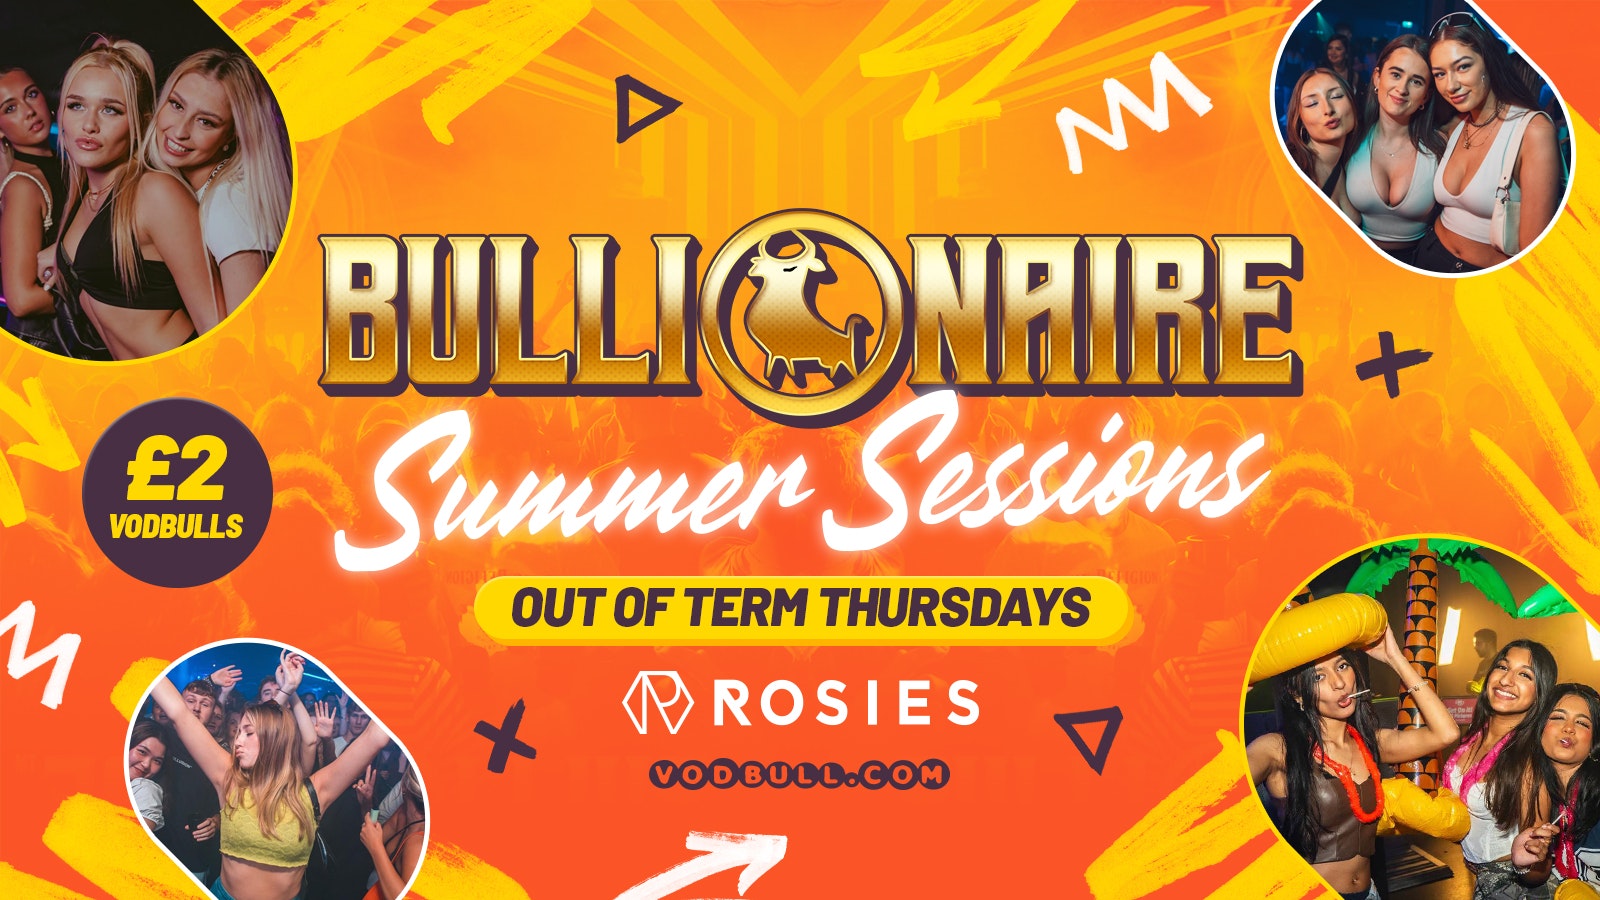 🧡 Bullionaire™️ [TONIGHT]☀️ Summer Sessions!☀️ Thursdays at Rosies by Vodbull ⭐️18/07